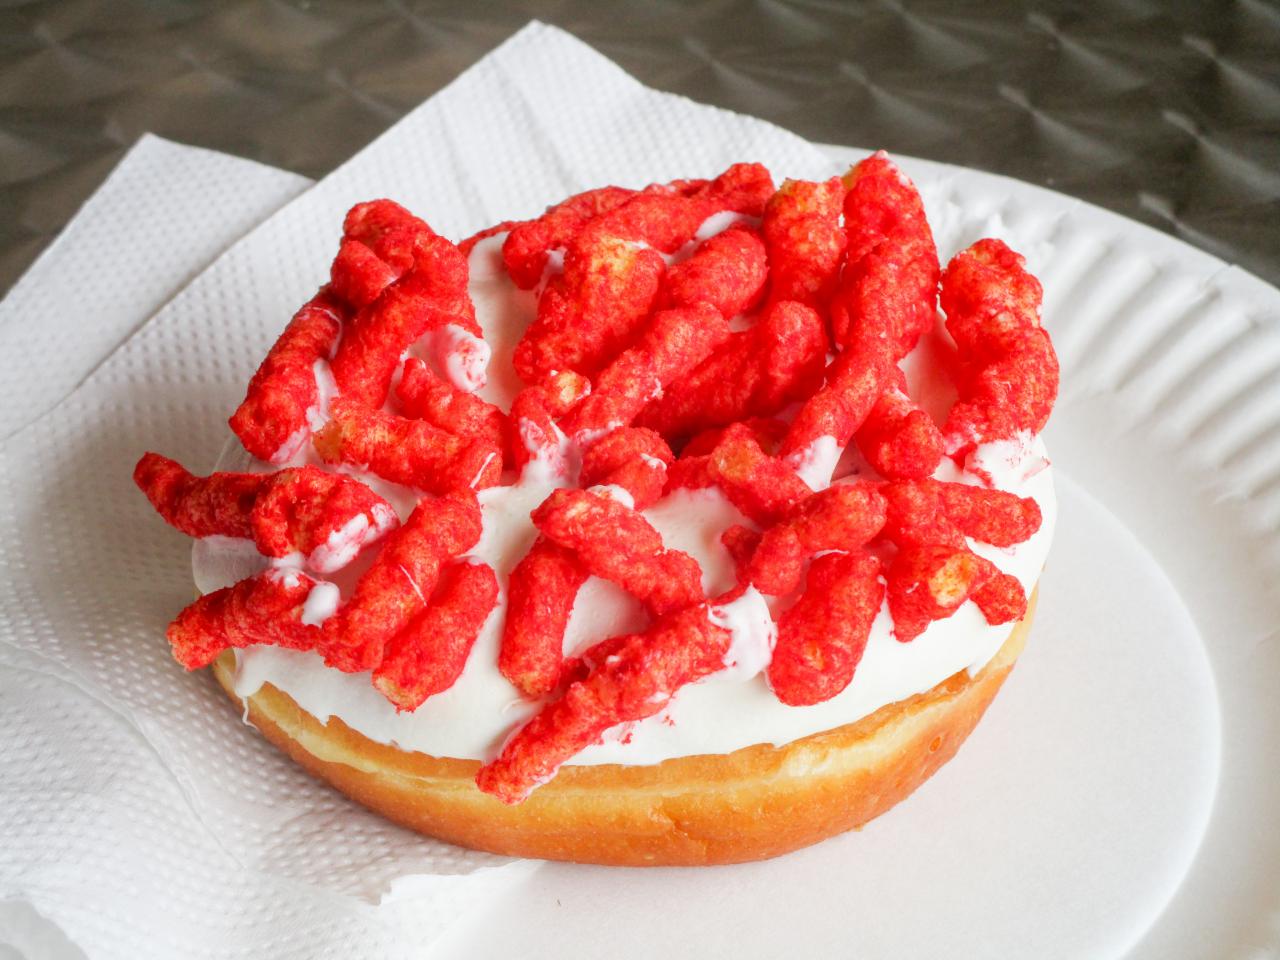 11 Crazy Dishes made with Flamin' Hot Cheetos